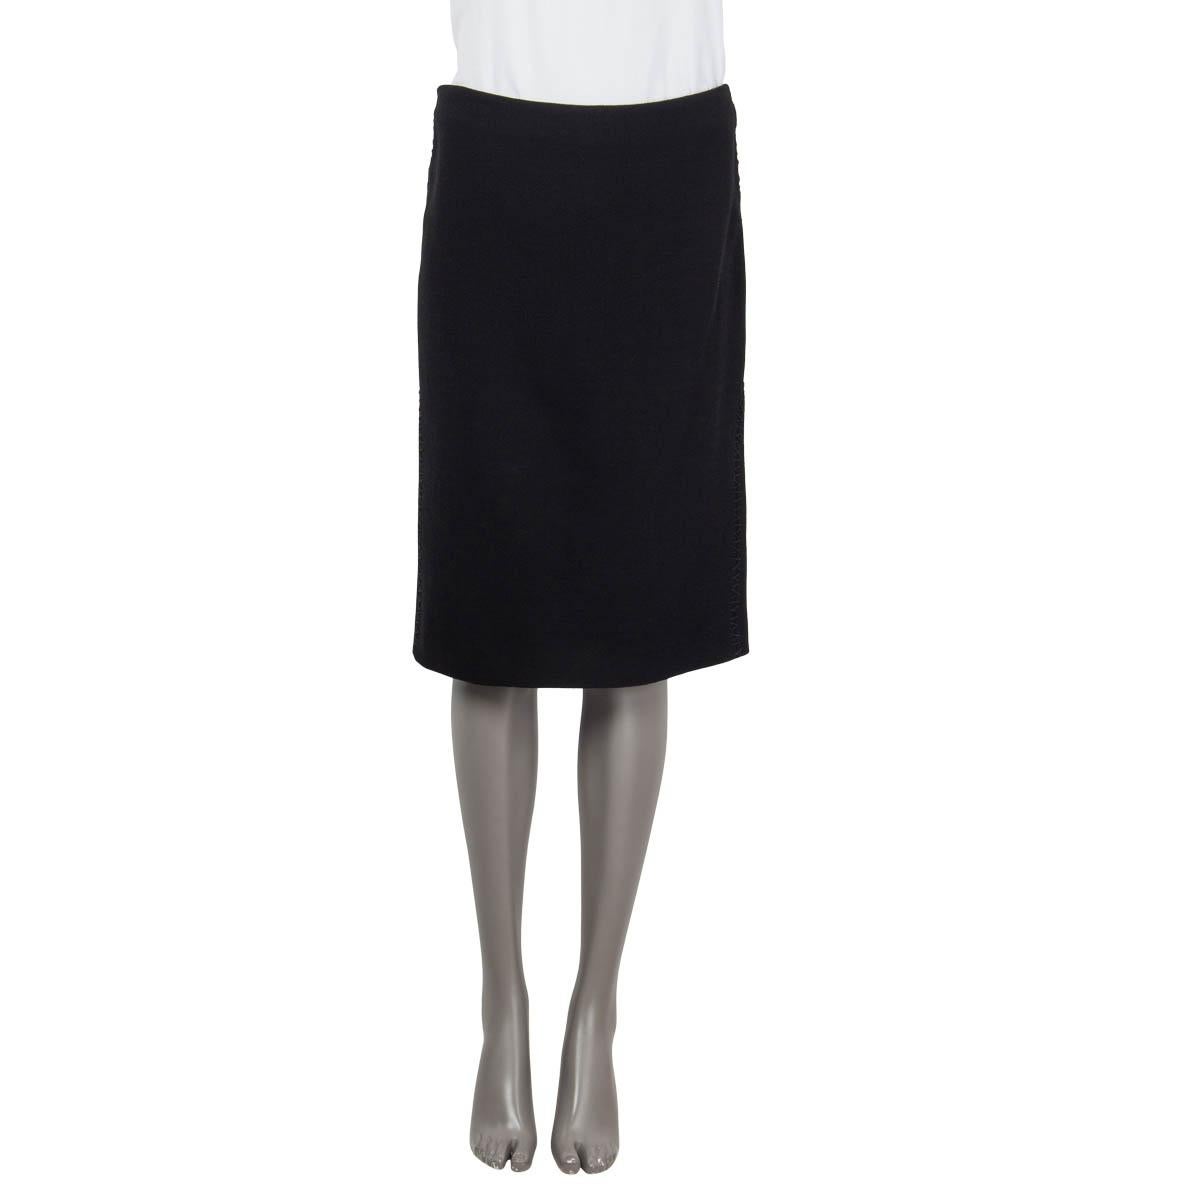 100% authentic Alexander McQueen knee-length straight skirt in black wool (100%) embellished with tonal stitching details on the side and on the back. Opens with a zipper on the back and is lined. Has been worn and lining shows a ripped part by the